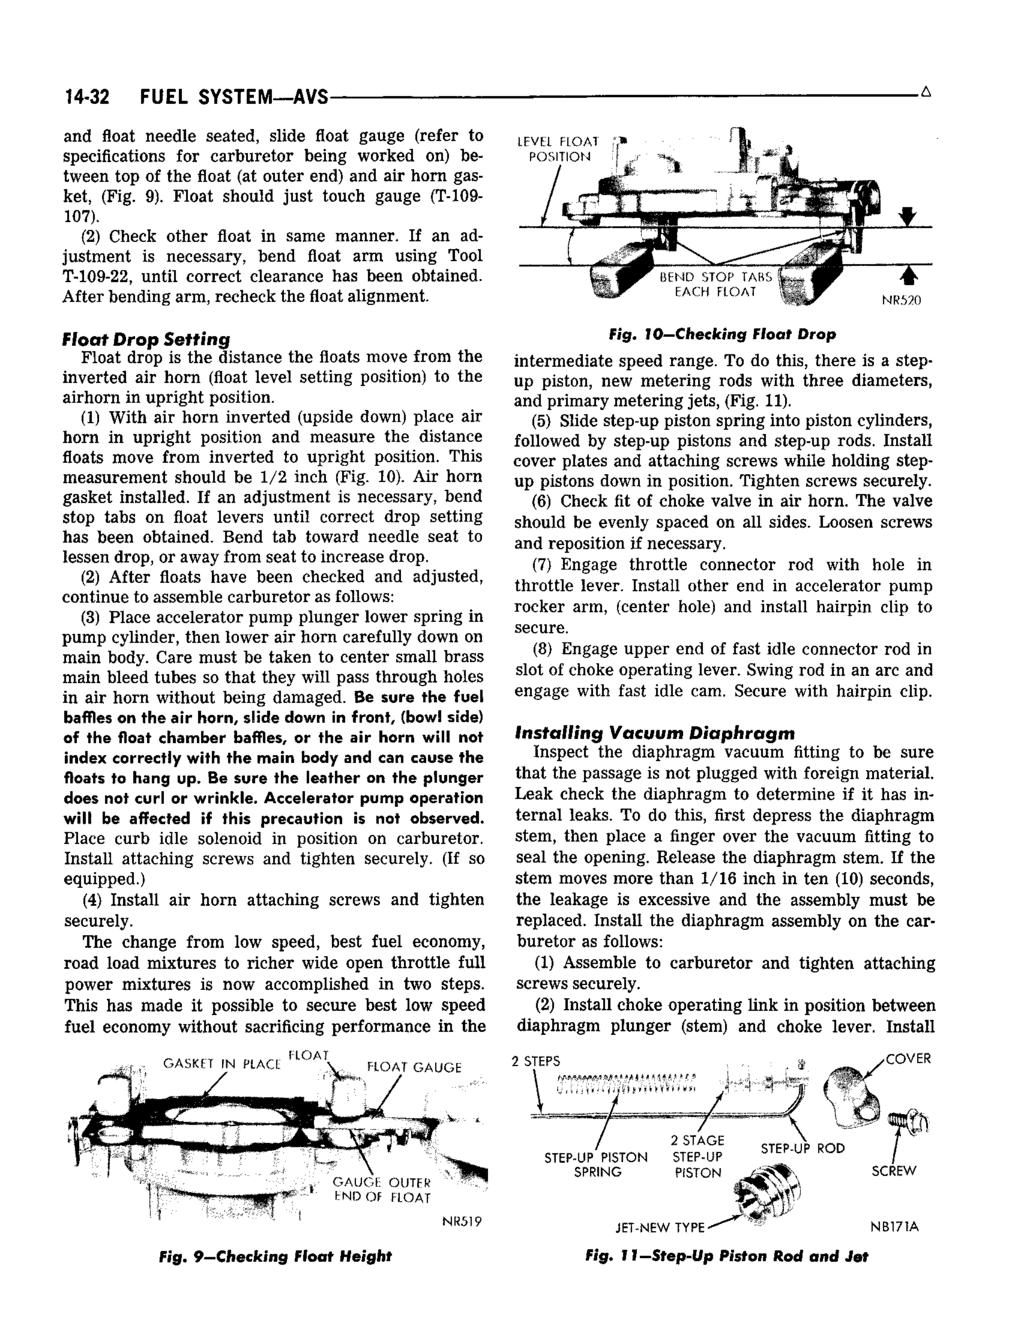 14-32 FUEL SYSTEM AVS and float needle seated, slide float gauge (refer to specifications for carburetor being worked on) between top of the float (at outer end) and air horn gasket, (Fig. 9).